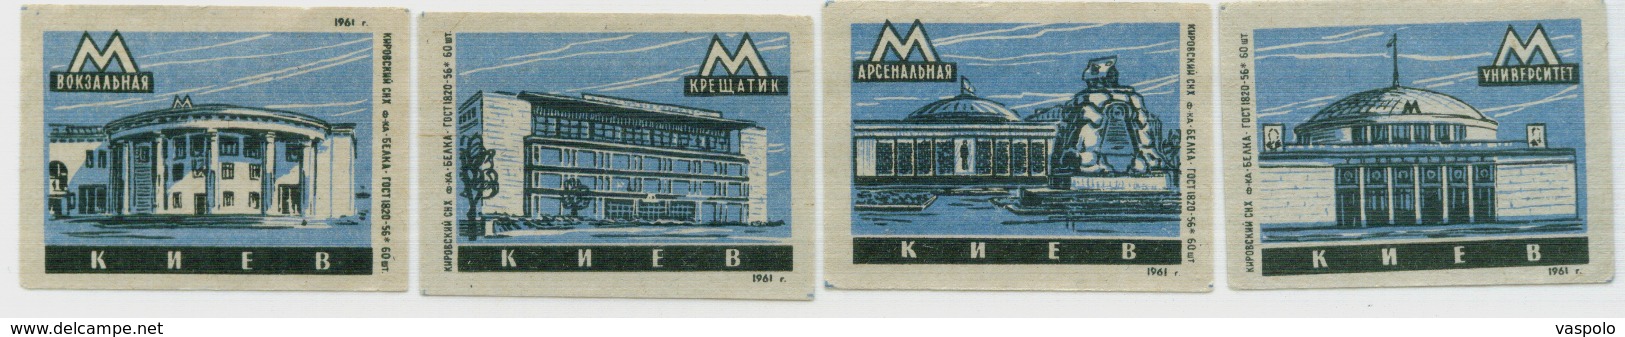 MATCHBOX LABELS RUSSIA CCCP URSS 1960's KIEV SUBWAY STATIONS - Collections